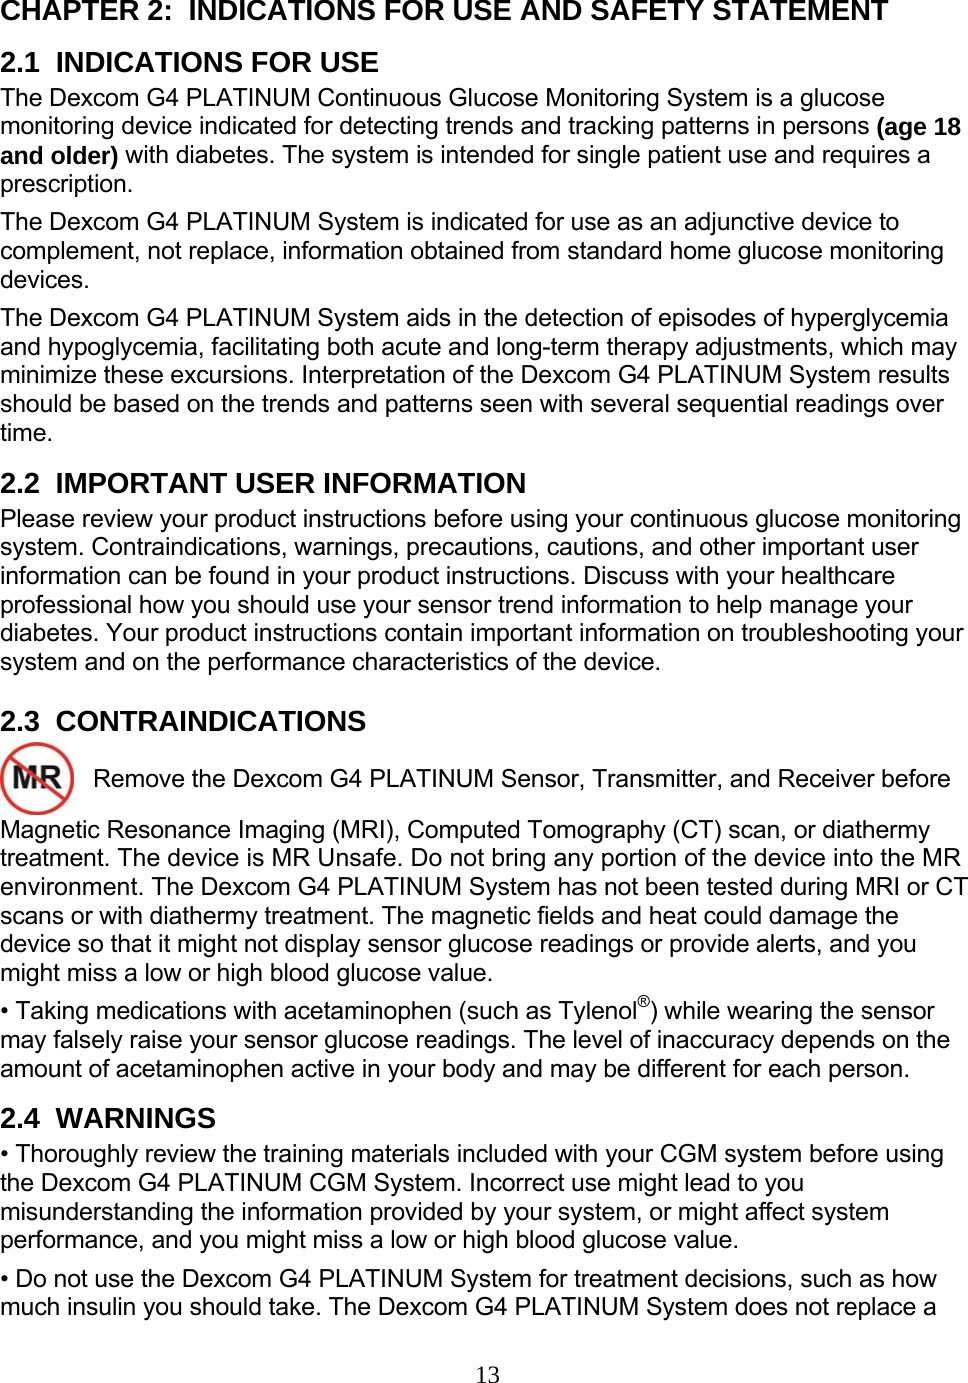 13  CHAPTER 2:  INDICATIONS FOR USE AND SAFETY STATEMENT 2.1  INDICATIONS FOR USE The Dexcom G4 PLATINUM Continuous Glucose Monitoring System is a glucose monitoring device indicated for detecting trends and tracking patterns in persons (age 18 and older) with diabetes. The system is intended for single patient use and requires a prescription. The Dexcom G4 PLATINUM System is indicated for use as an adjunctive device to complement, not replace, information obtained from standard home glucose monitoring devices. The Dexcom G4 PLATINUM System aids in the detection of episodes of hyperglycemia and hypoglycemia, facilitating both acute and long-term therapy adjustments, which may minimize these excursions. Interpretation of the Dexcom G4 PLATINUM System results should be based on the trends and patterns seen with several sequential readings over time. 2.2  IMPORTANT USER INFORMATION Please review your product instructions before using your continuous glucose monitoring system. Contraindications, warnings, precautions, cautions, and other important user information can be found in your product instructions. Discuss with your healthcare professional how you should use your sensor trend information to help manage your diabetes. Your product instructions contain important information on troubleshooting your system and on the performance characteristics of the device. 2.3  CONTRAINDICATIONS    Remove the Dexcom G4 PLATINUM Sensor, Transmitter, and Receiver before Magnetic Resonance Imaging (MRI), Computed Tomography (CT) scan, or diathermy treatment. The device is MR Unsafe. Do not bring any portion of the device into the MR environment. The Dexcom G4 PLATINUM System has not been tested during MRI or CT scans or with diathermy treatment. The magnetic fields and heat could damage the device so that it might not display sensor glucose readings or provide alerts, and you might miss a low or high blood glucose value. • Taking medications with acetaminophen (such as Tylenol®) while wearing the sensor may falsely raise your sensor glucose readings. The level of inaccuracy depends on the amount of acetaminophen active in your body and may be different for each person. 2.4  WARNINGS • Thoroughly review the training materials included with your CGM system before using the Dexcom G4 PLATINUM CGM System. Incorrect use might lead to you misunderstanding the information provided by your system, or might affect system performance, and you might miss a low or high blood glucose value. • Do not use the Dexcom G4 PLATINUM System for treatment decisions, such as how much insulin you should take. The Dexcom G4 PLATINUM System does not replace a 